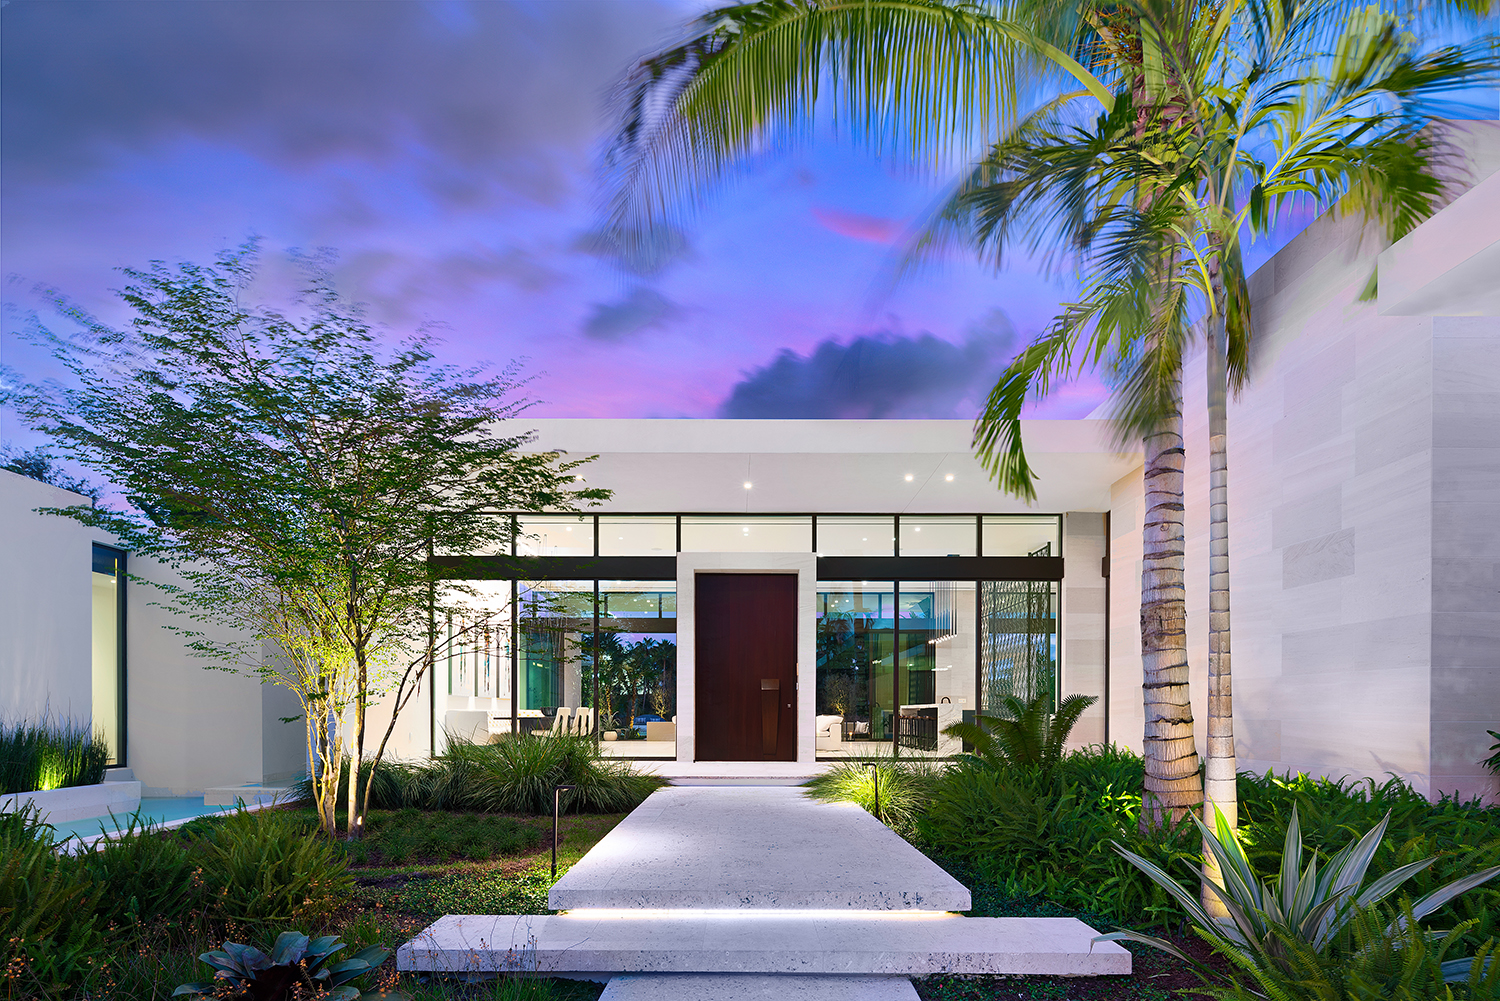 Expect to see more tropical modernism in South Florida suburbs.